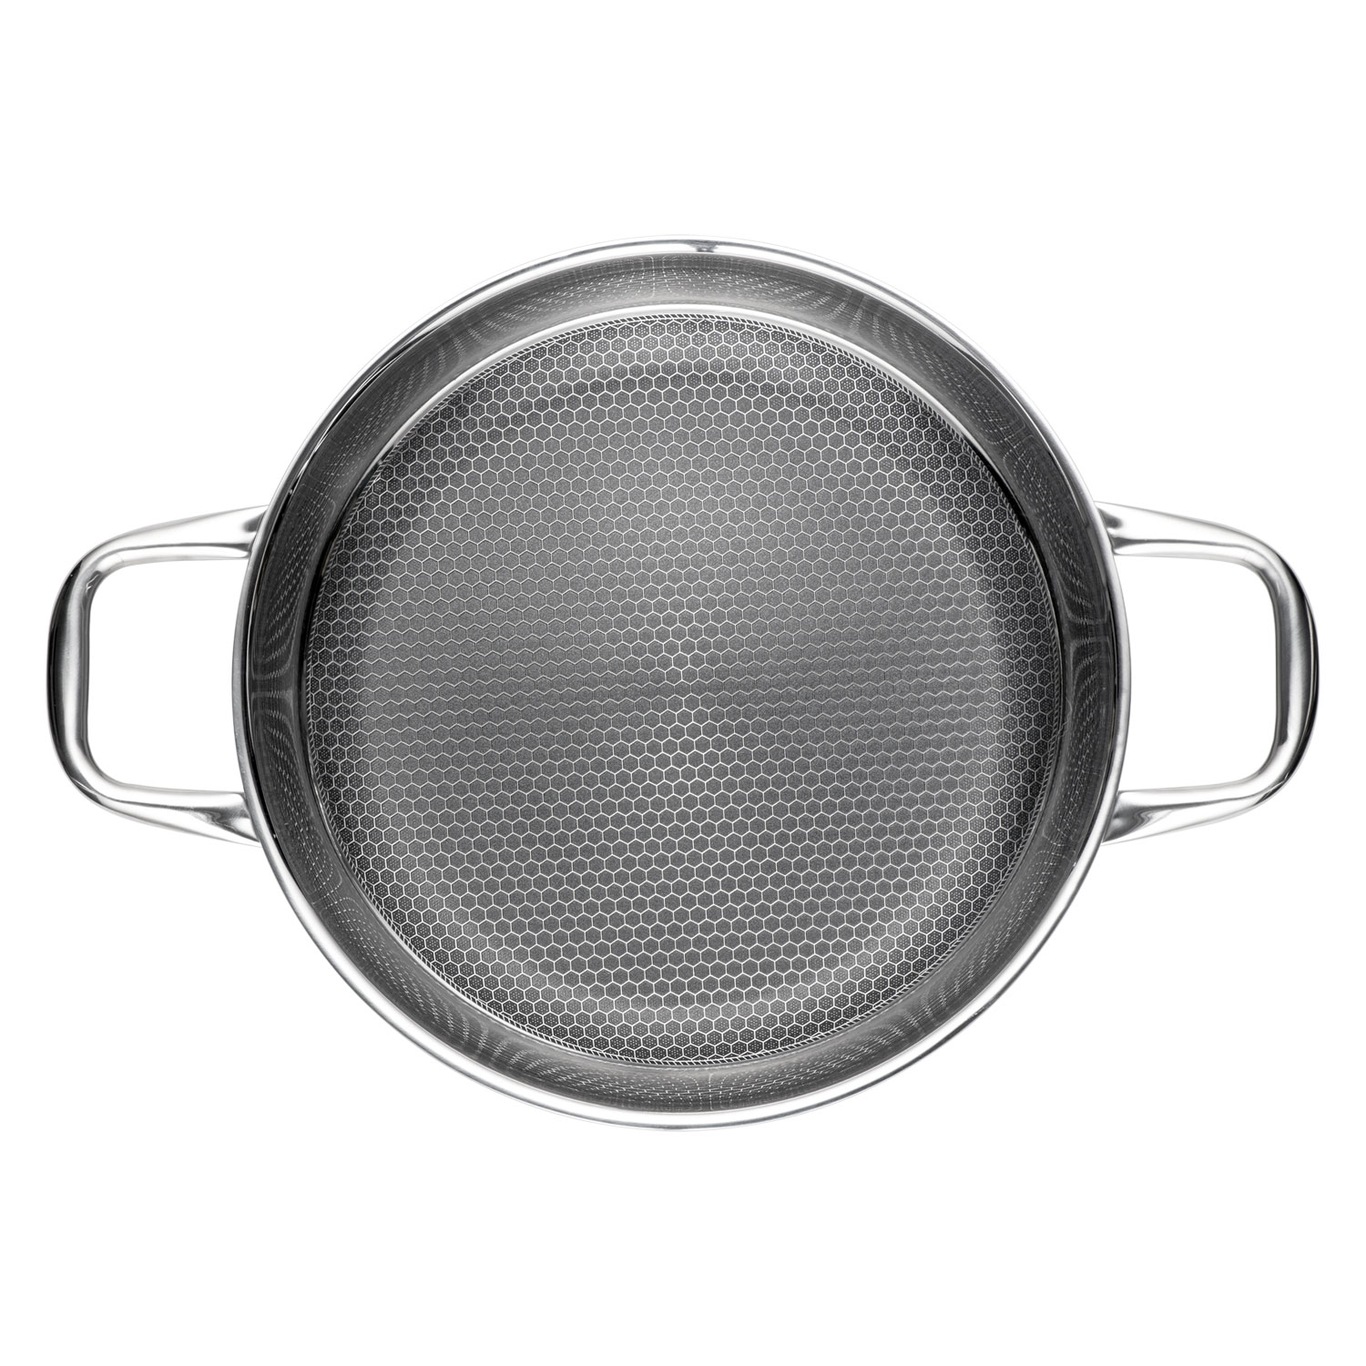 Steelsafe Frying Pan With Handle 28 cm